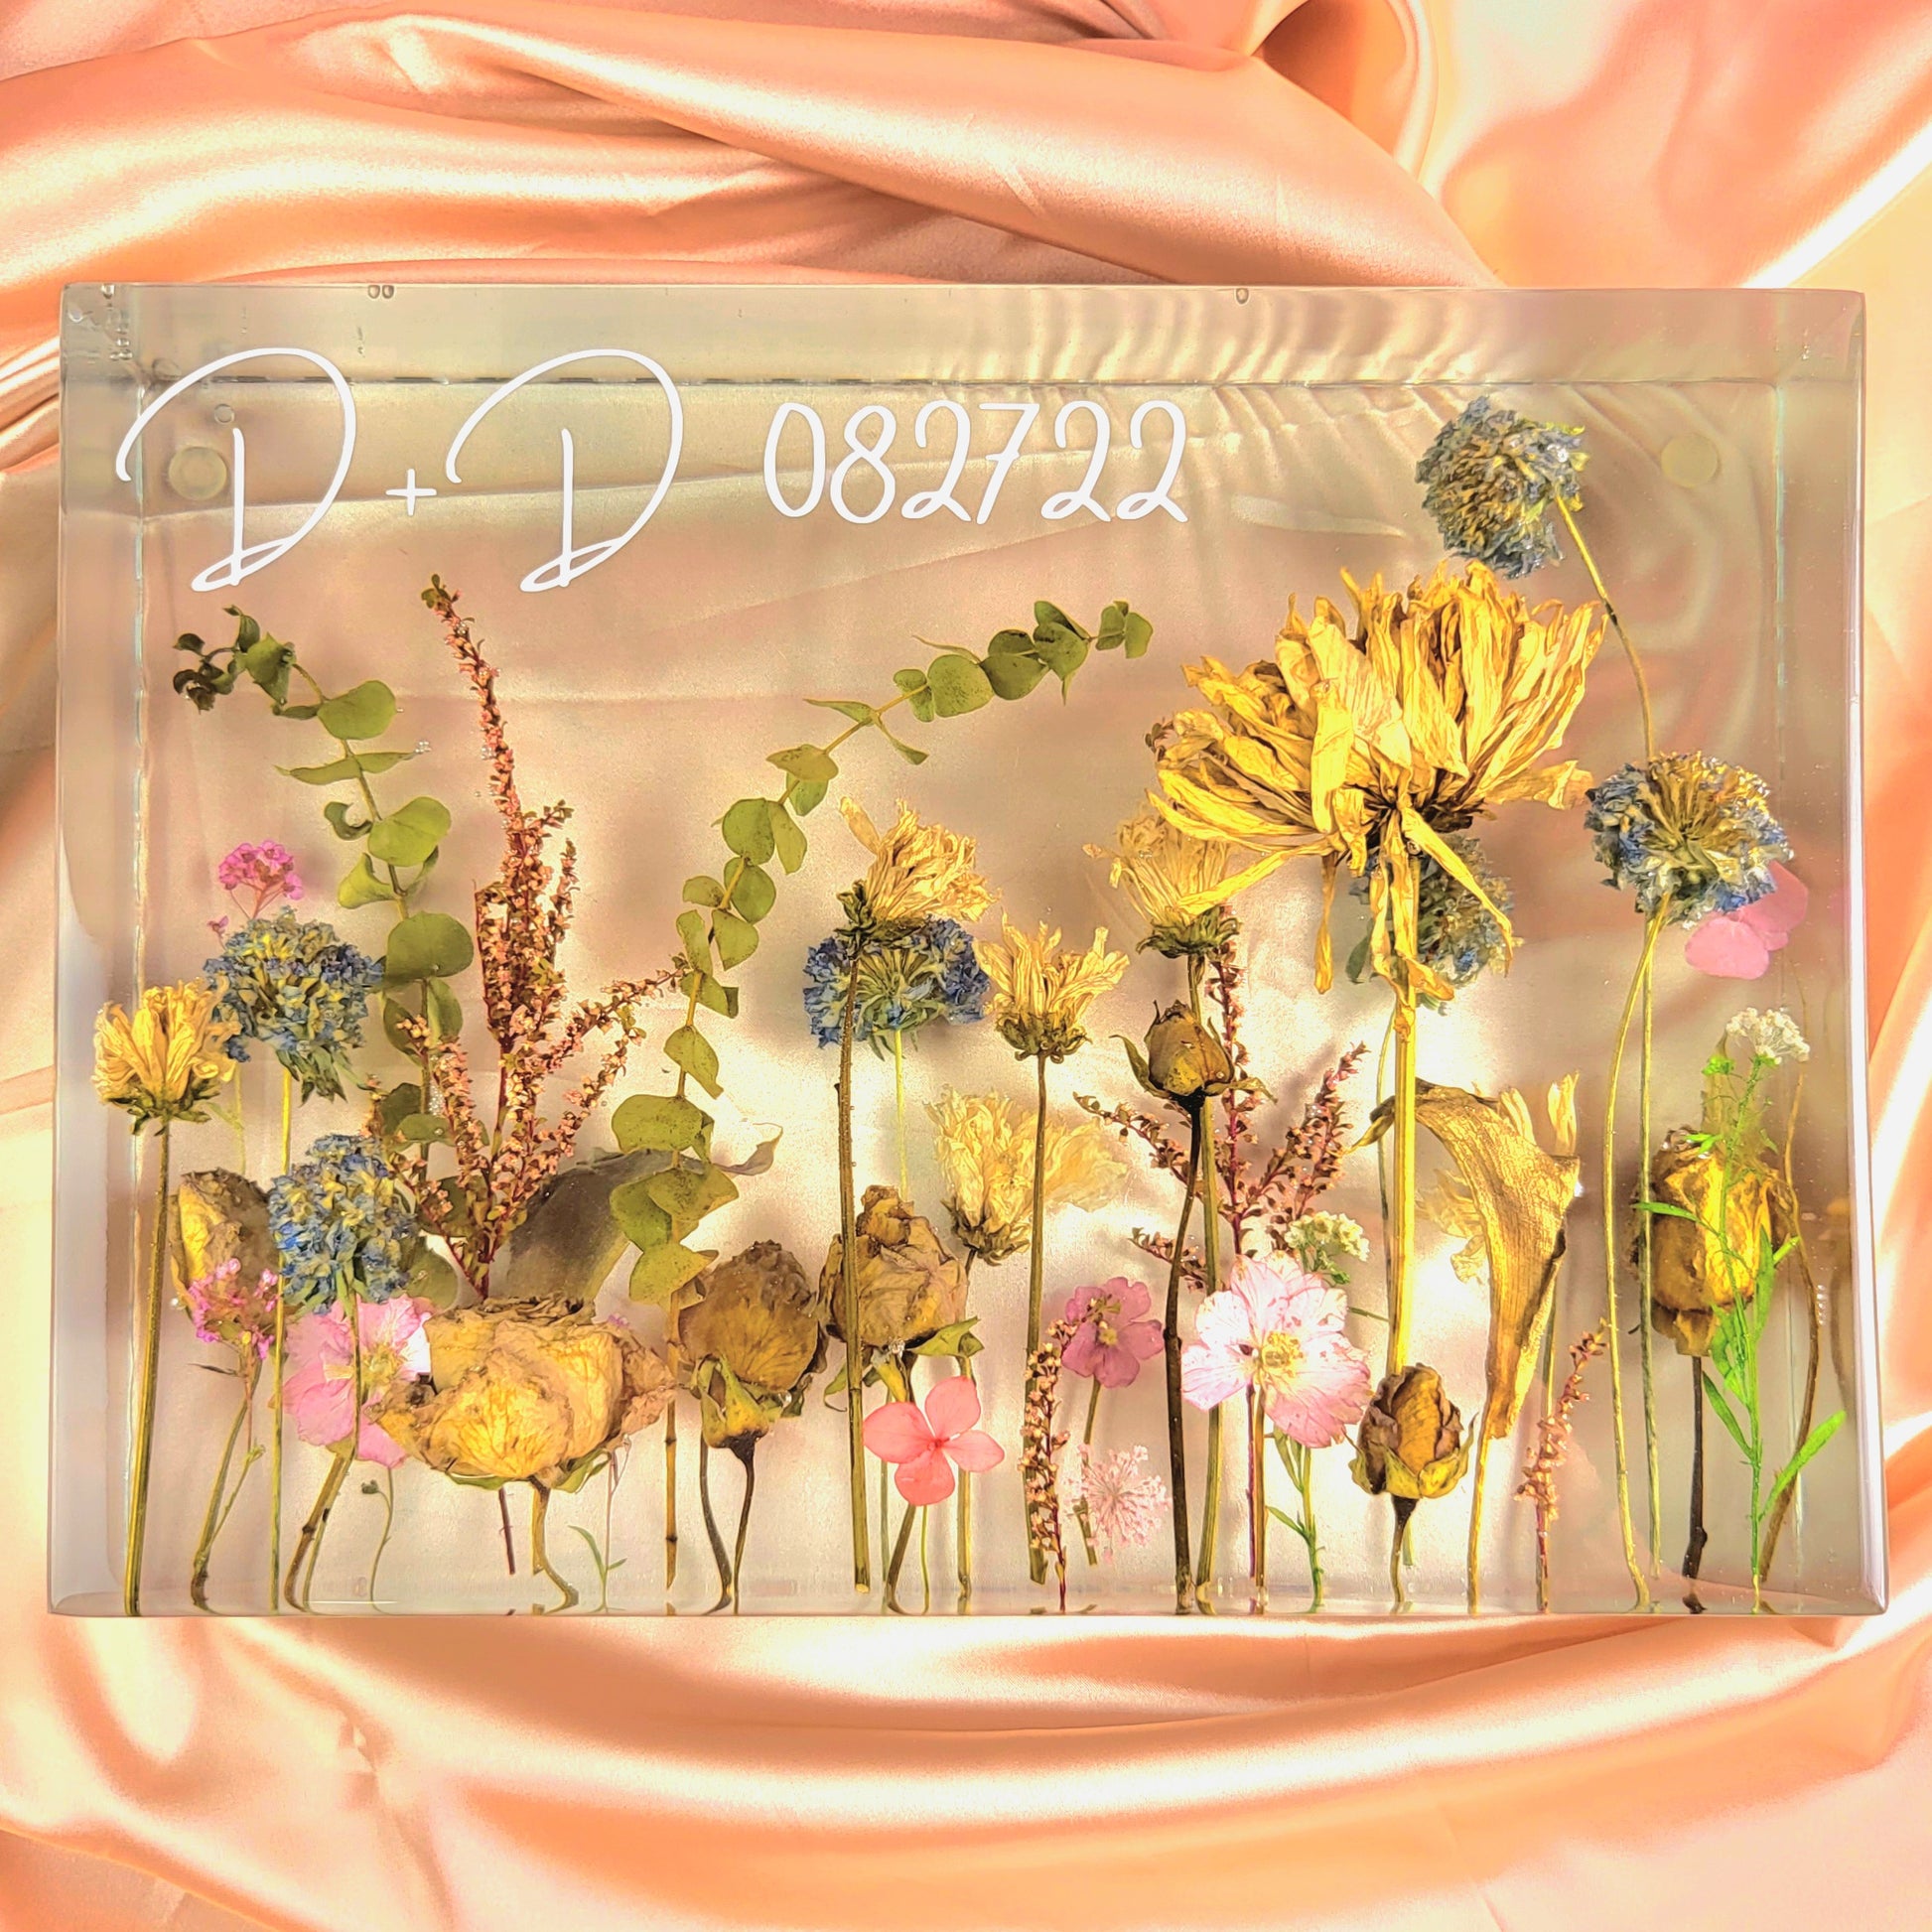 Dried Flowers For Resin Art and craft, Packaging Size: In A Box at